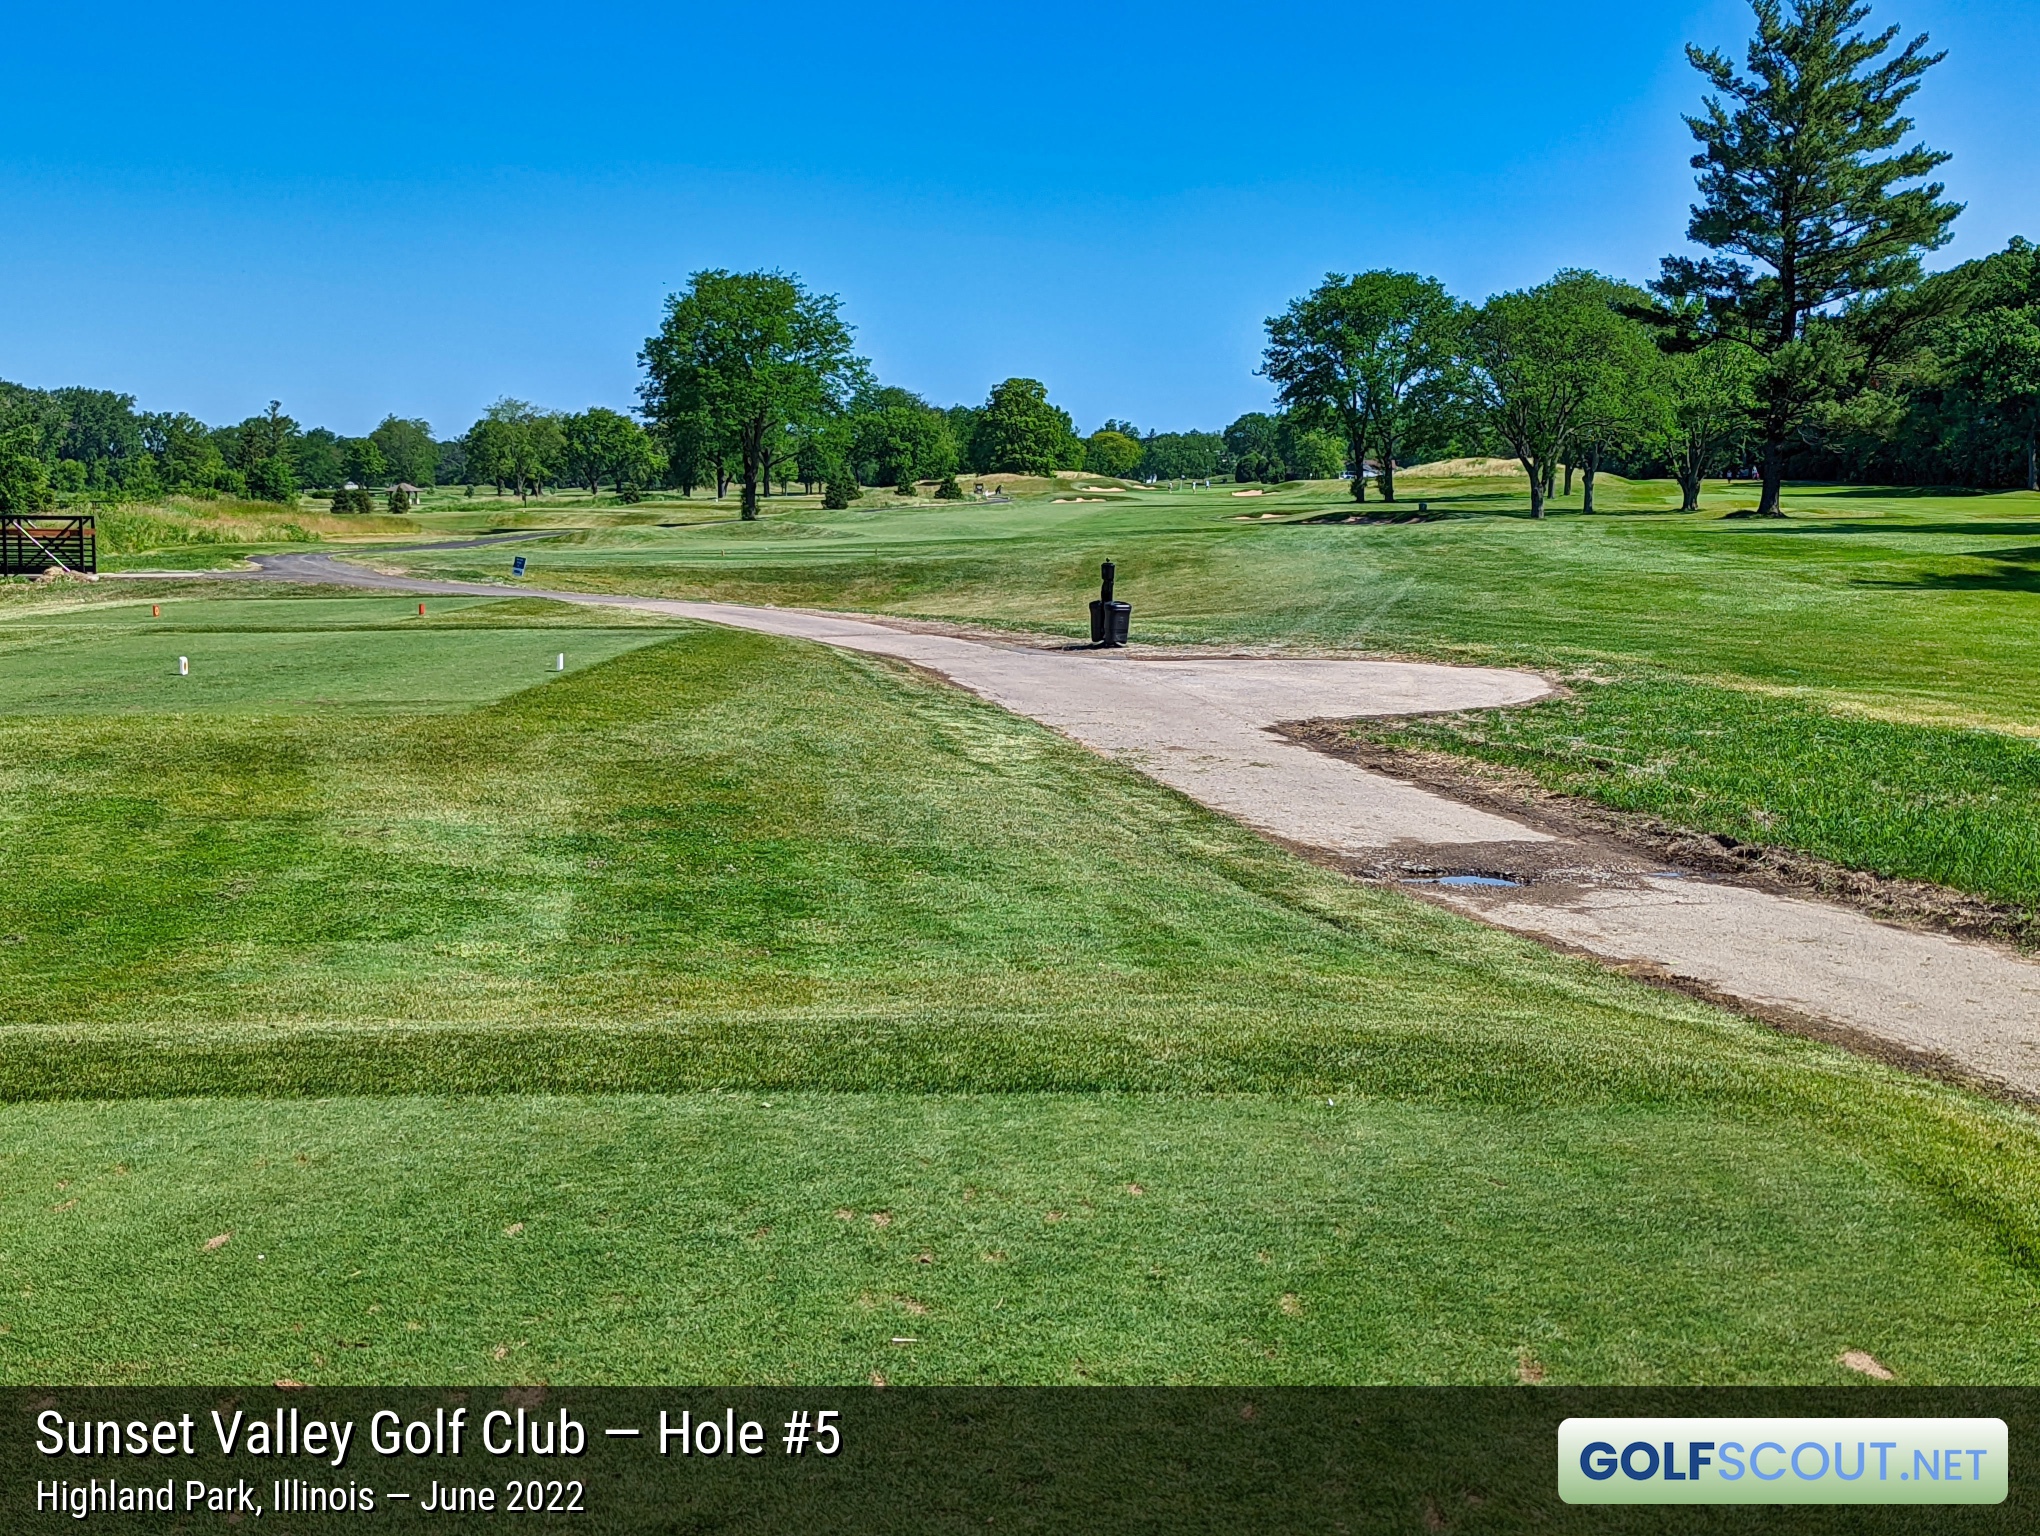 Photo of hole #5 at Sunset Valley Golf Club in Highland Park, Illinois. 